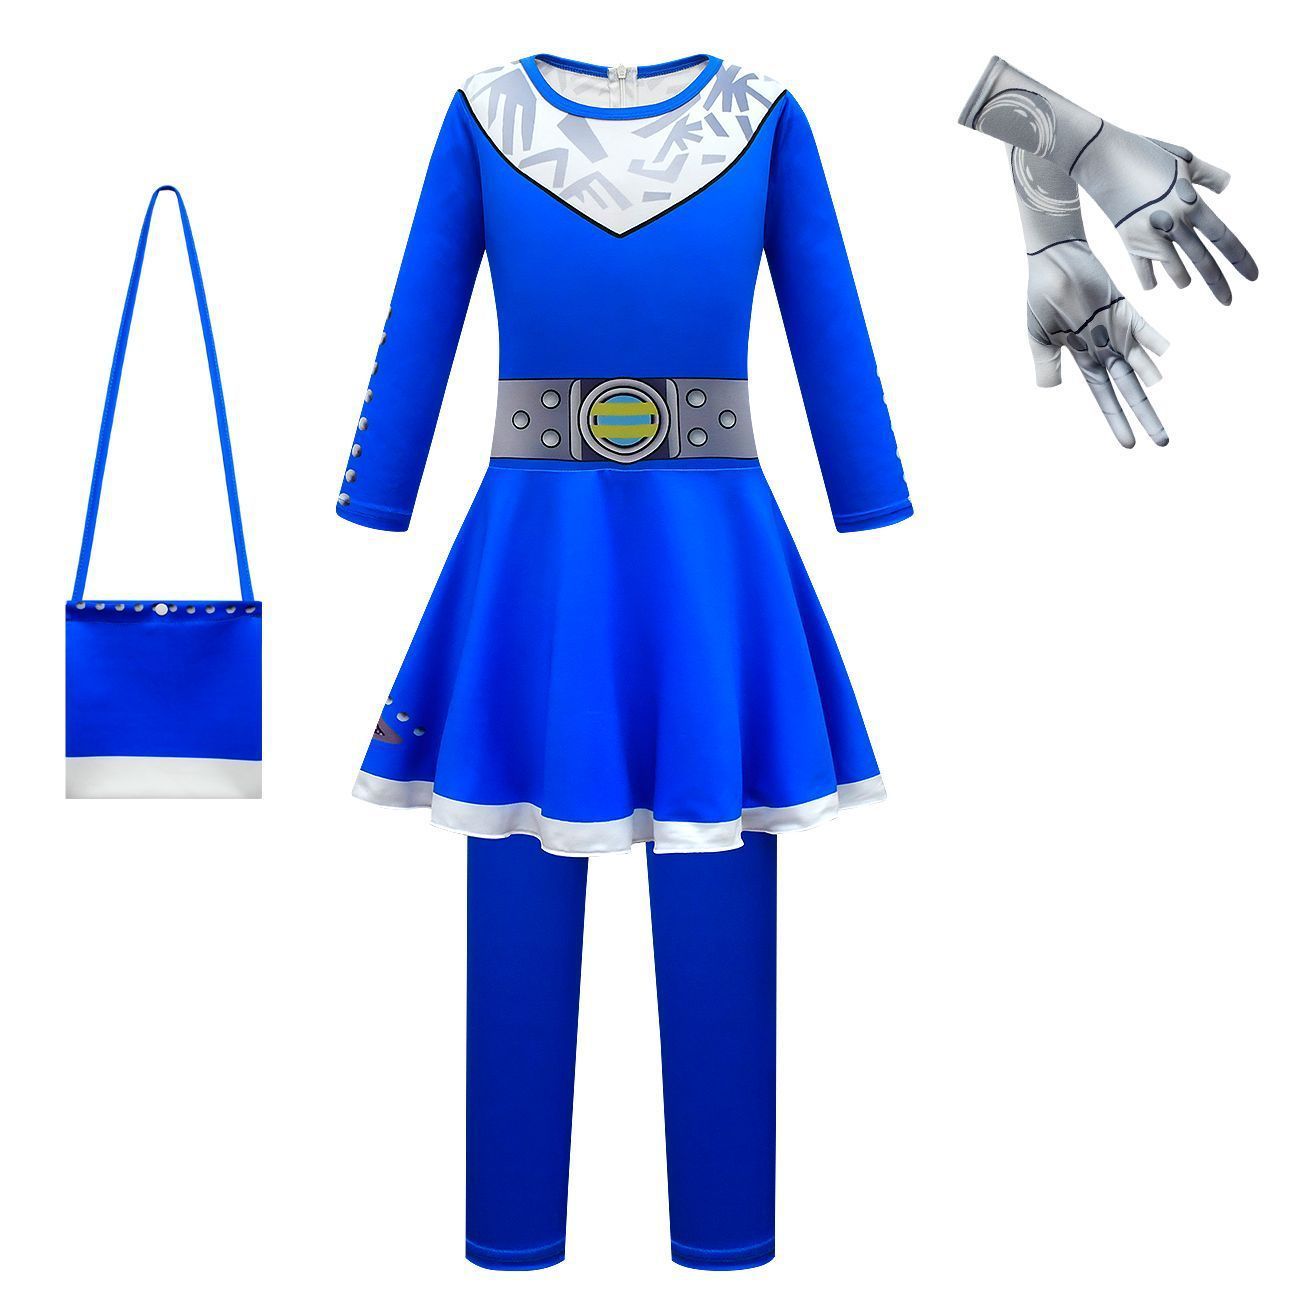 College Zombies 3 Blue Cosplay dress Jumpsuit Costume Bodysuit Outfits for kids